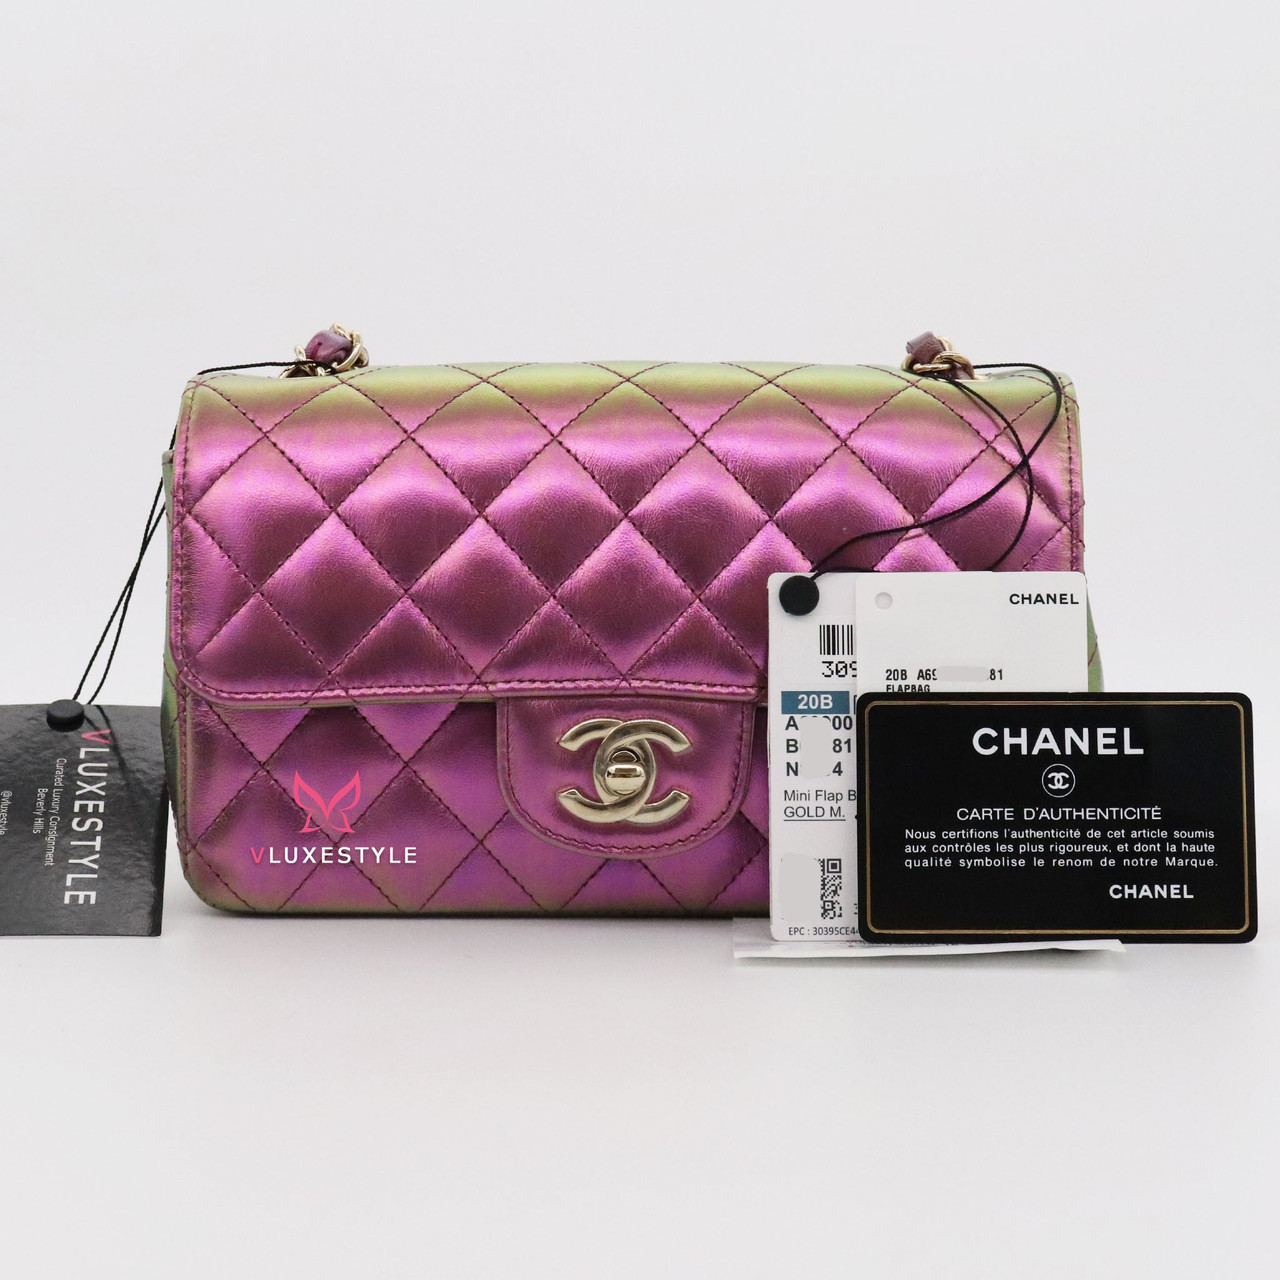 Chanel Light Purple Quilted Lambskin Leather Classic Jumbo Double Flap Bag